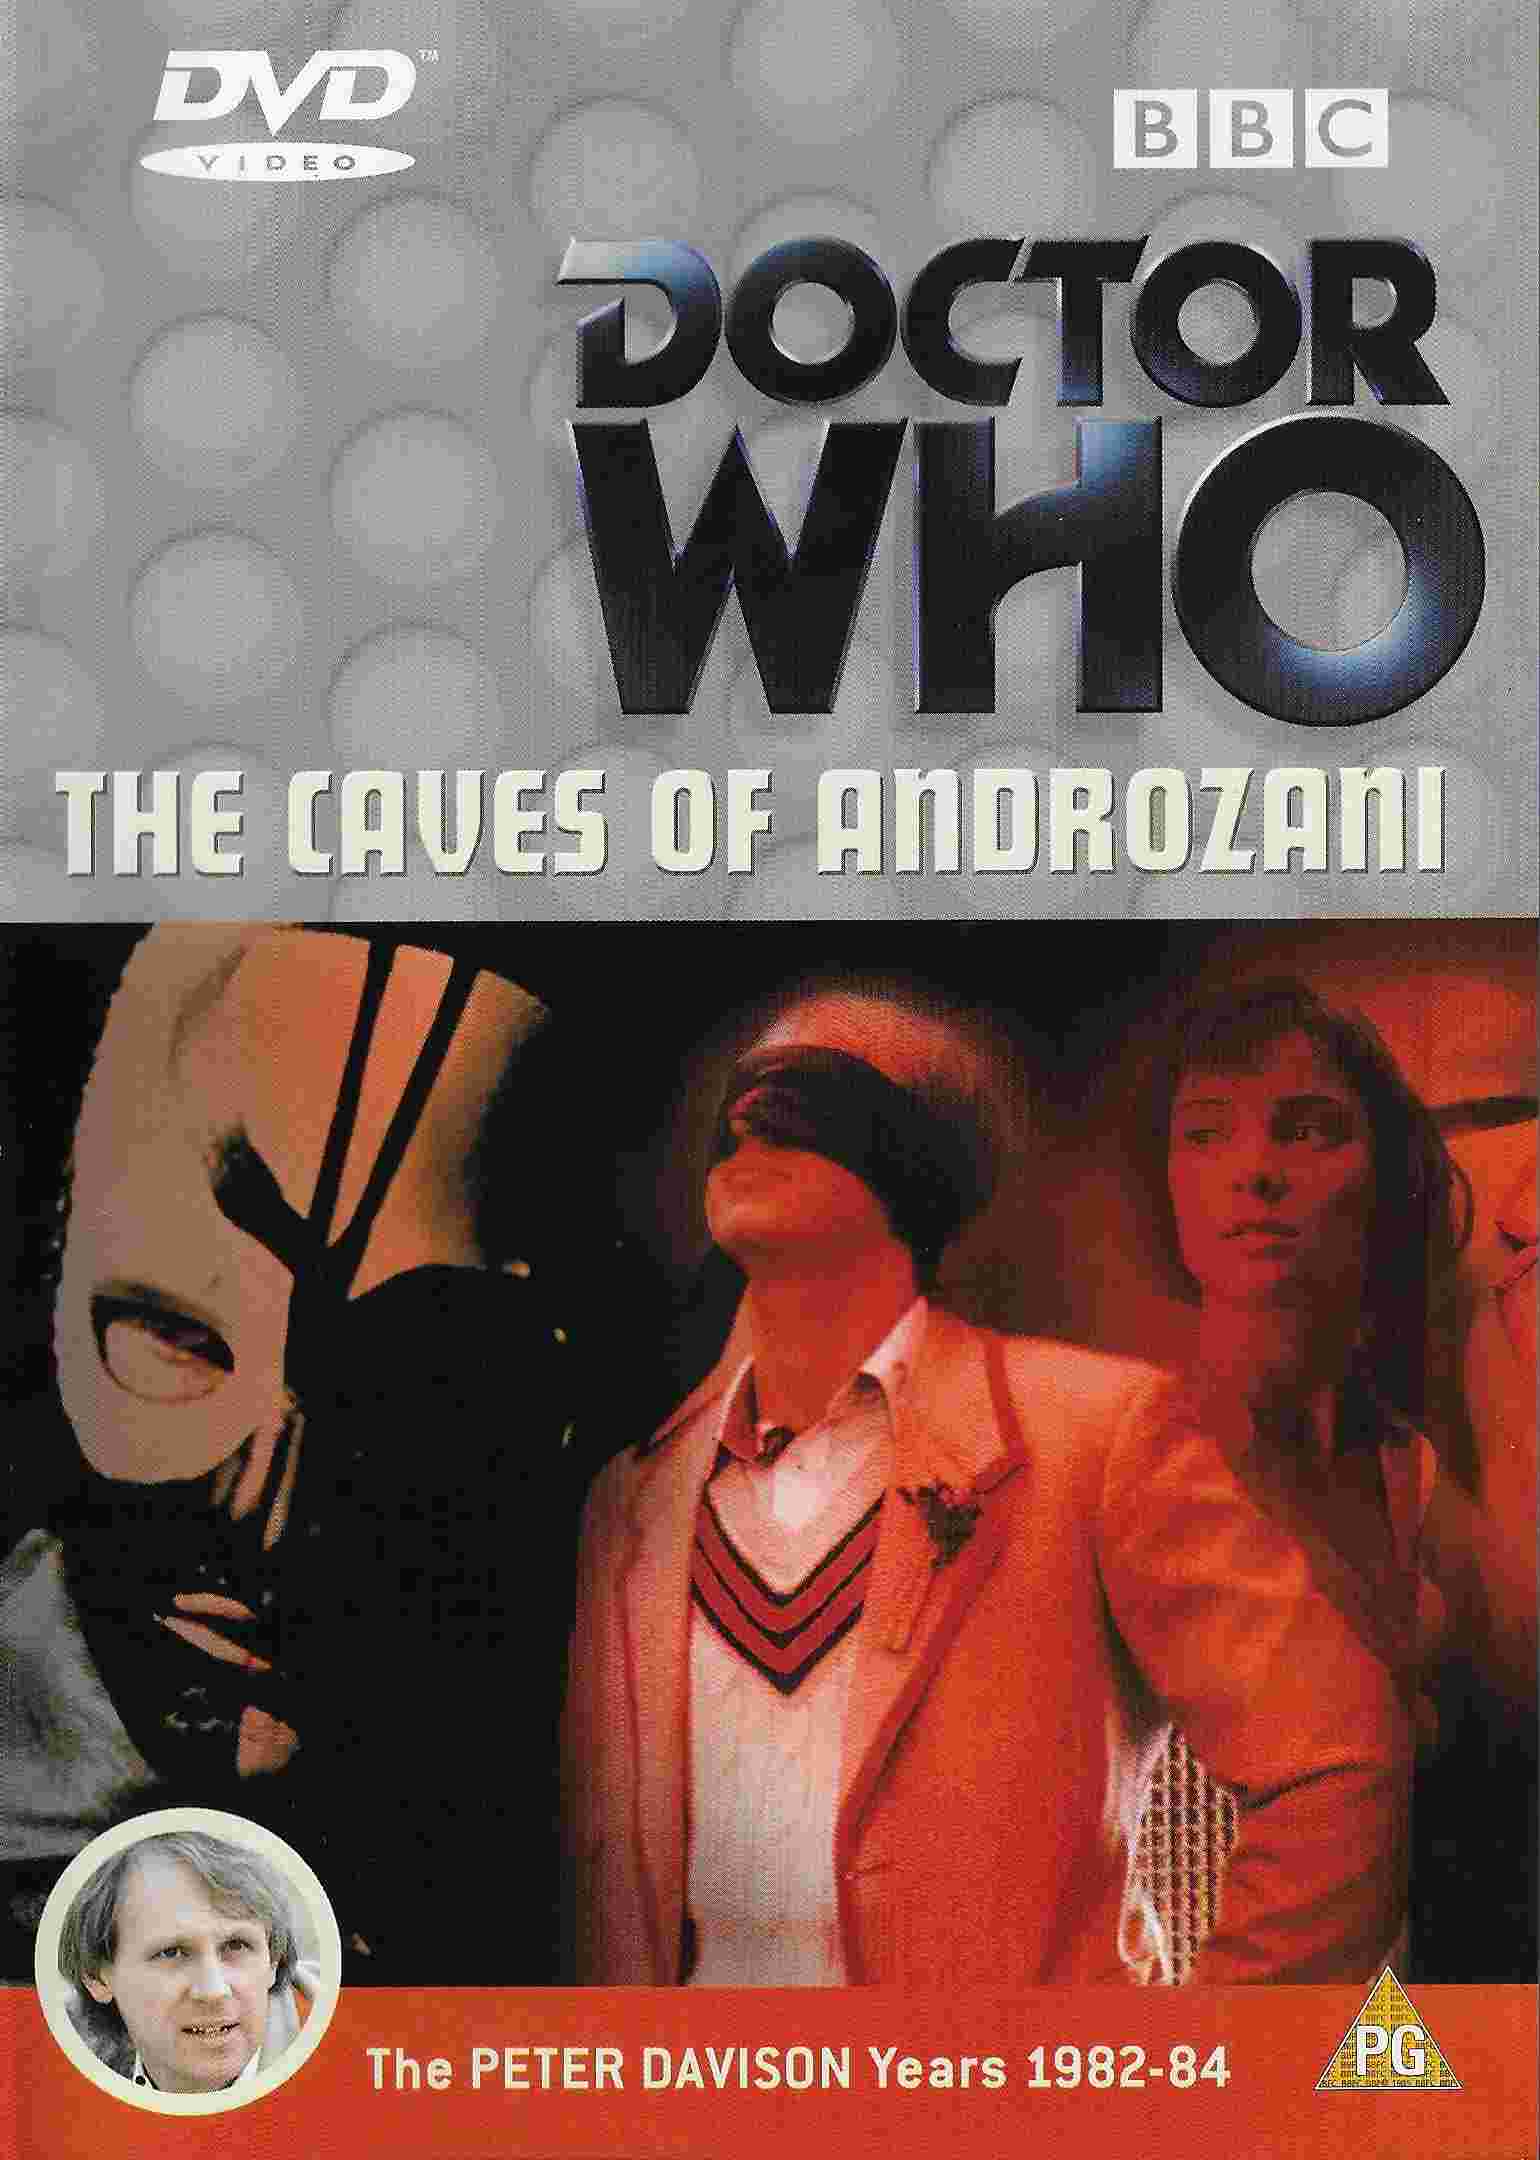 Picture of Doctor Who - The caves of Androzani by artist Robert Holmes from the BBC dvds - Records and Tapes library